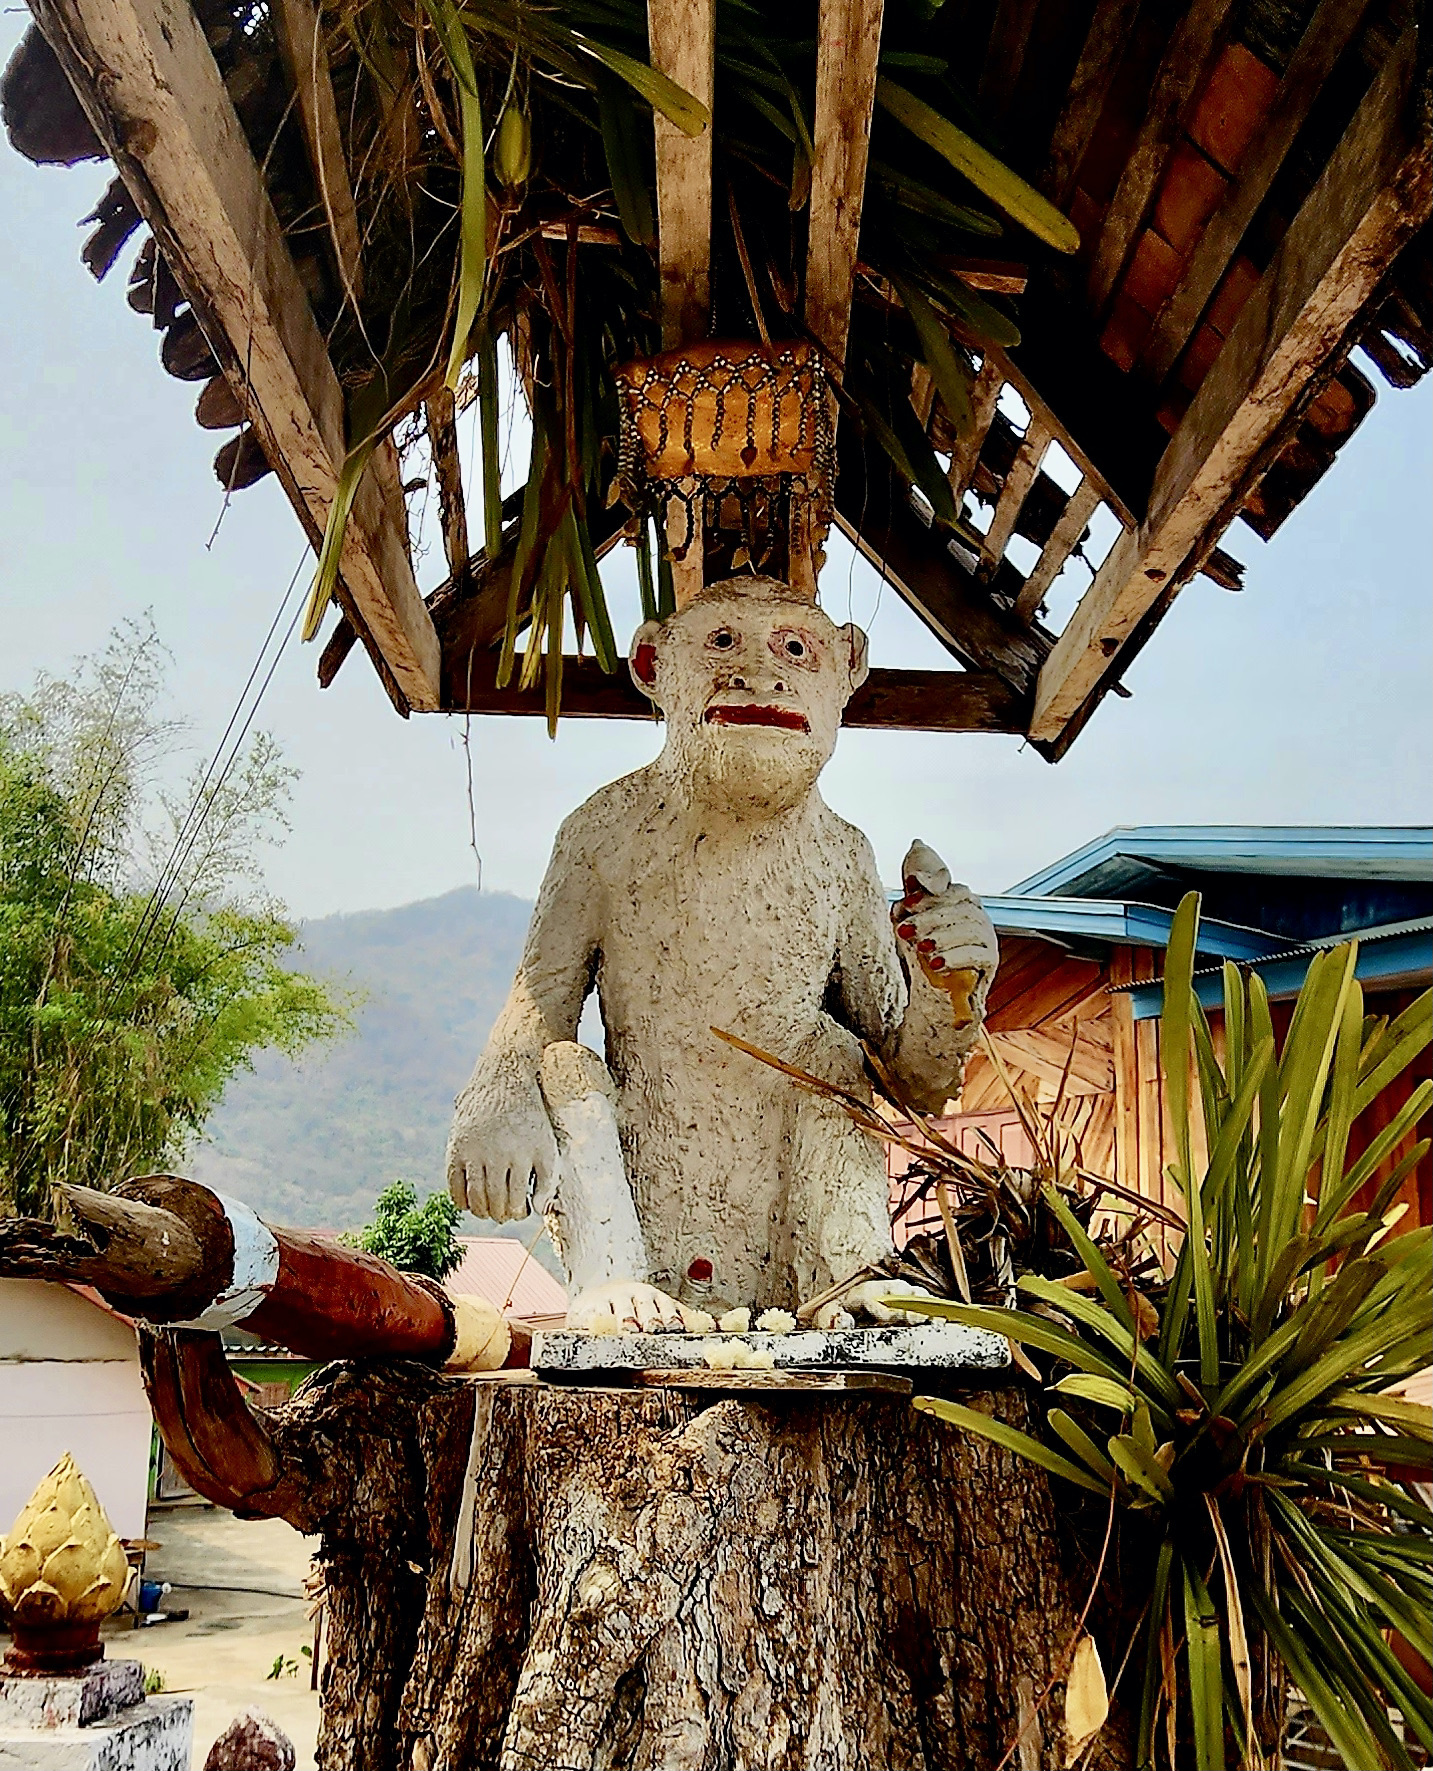 The White Monkey of the Mekong River